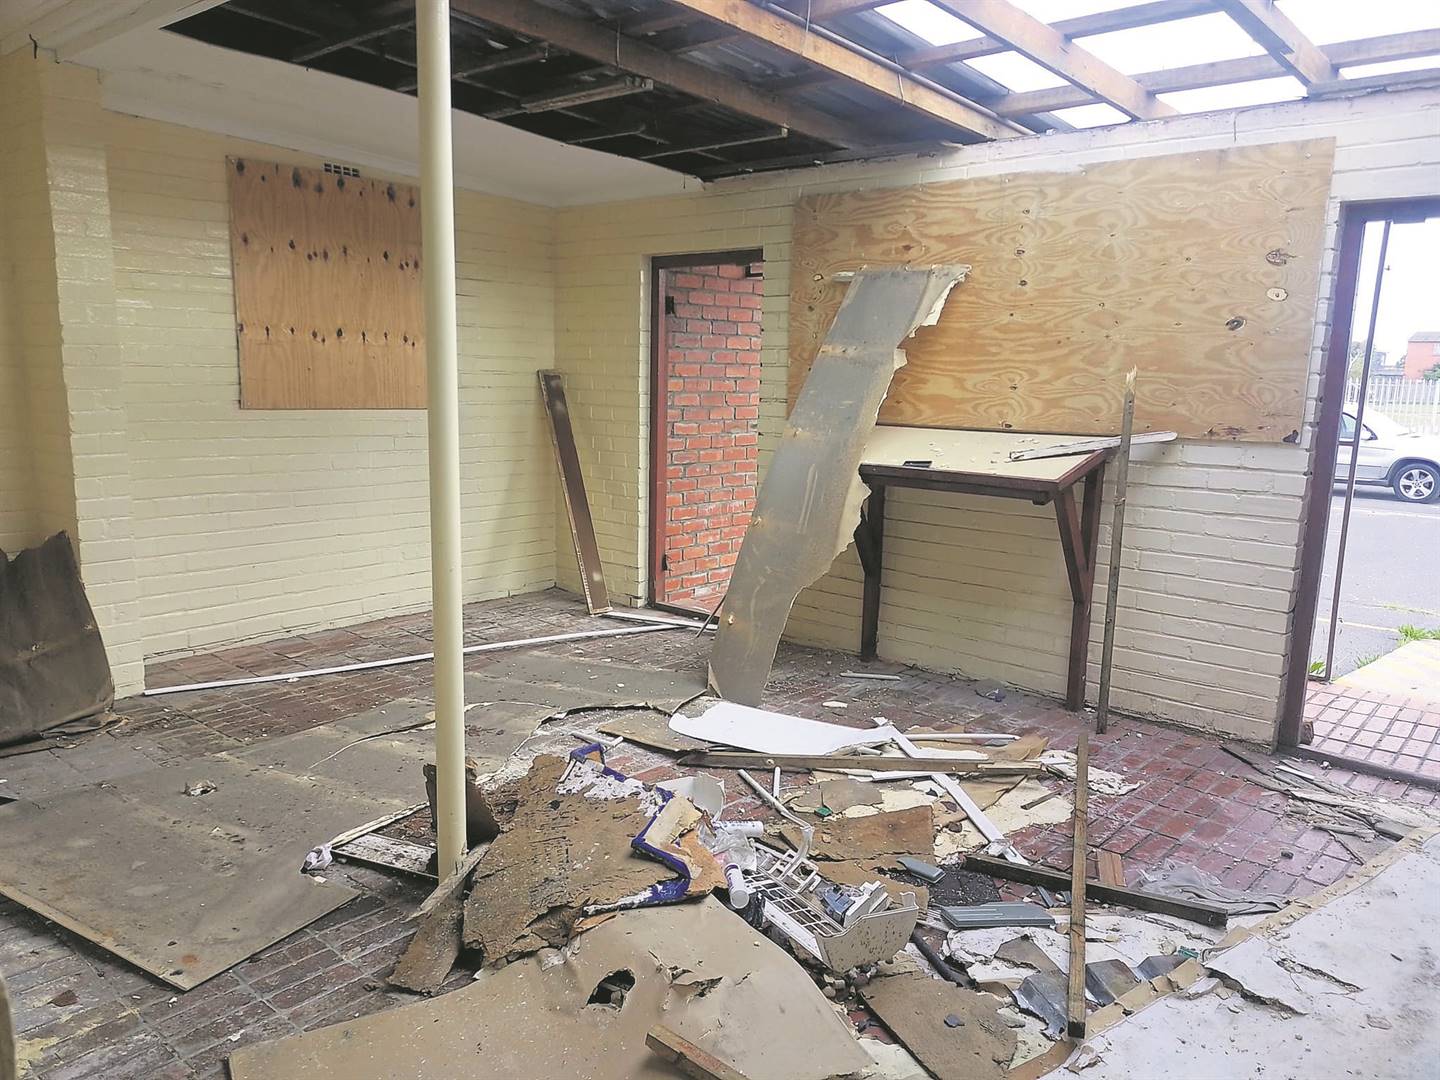 A law-enforcement facility and a St Luke’s hospice building, situated on the same erf in Lotus River, has been plagued by vandalism and theft. PHOTO: Natasha Bezuidenhout